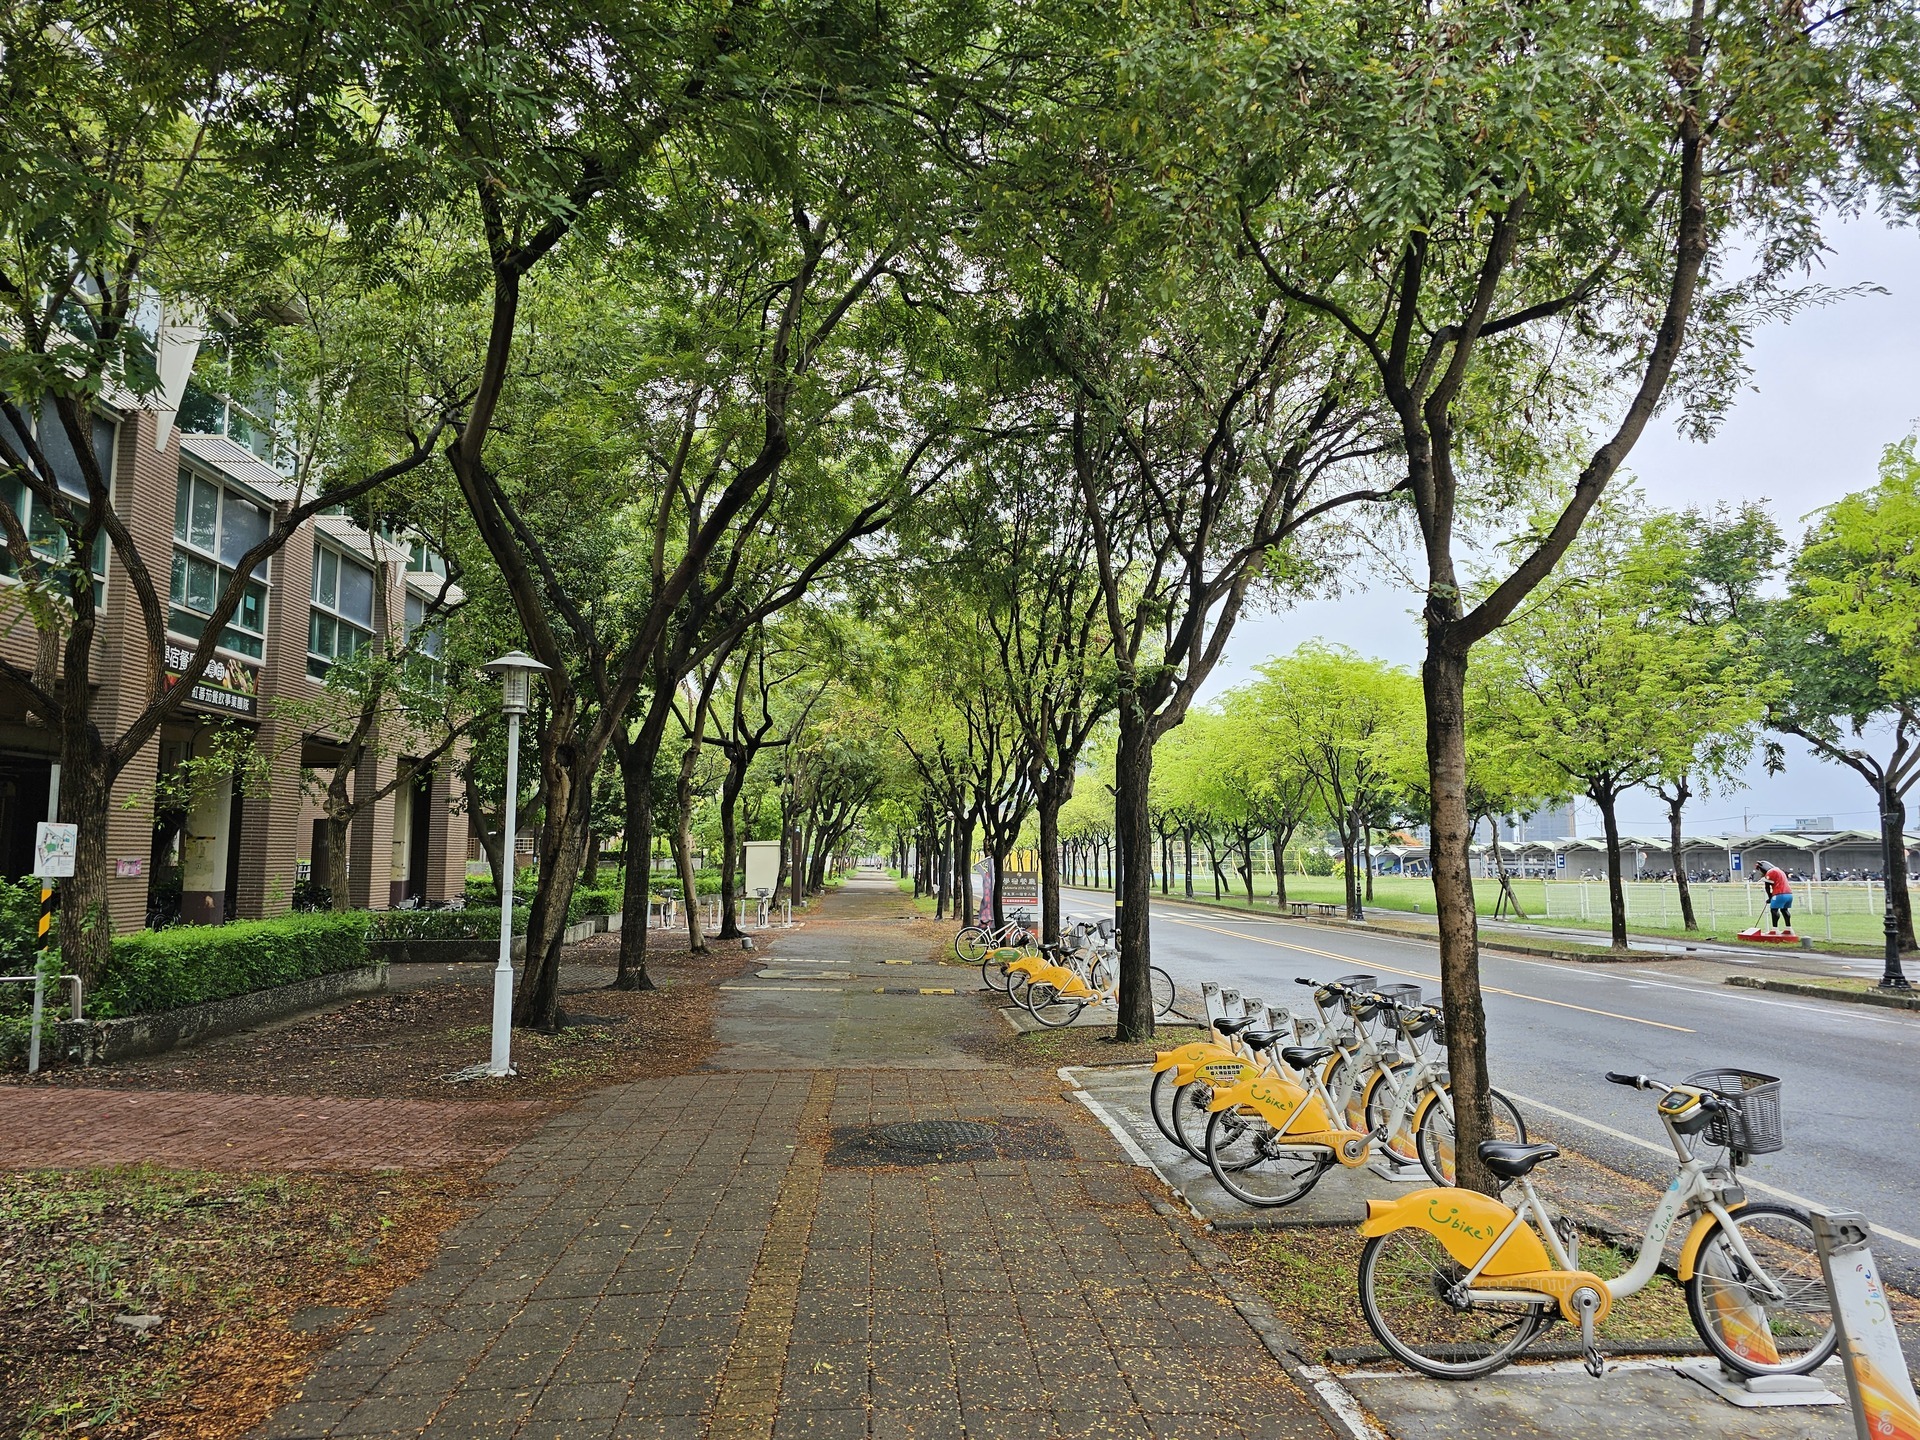 The "UI GreenMetric World University Rankings": NUK Advances to 285th Place –Green Corridors and YouBike